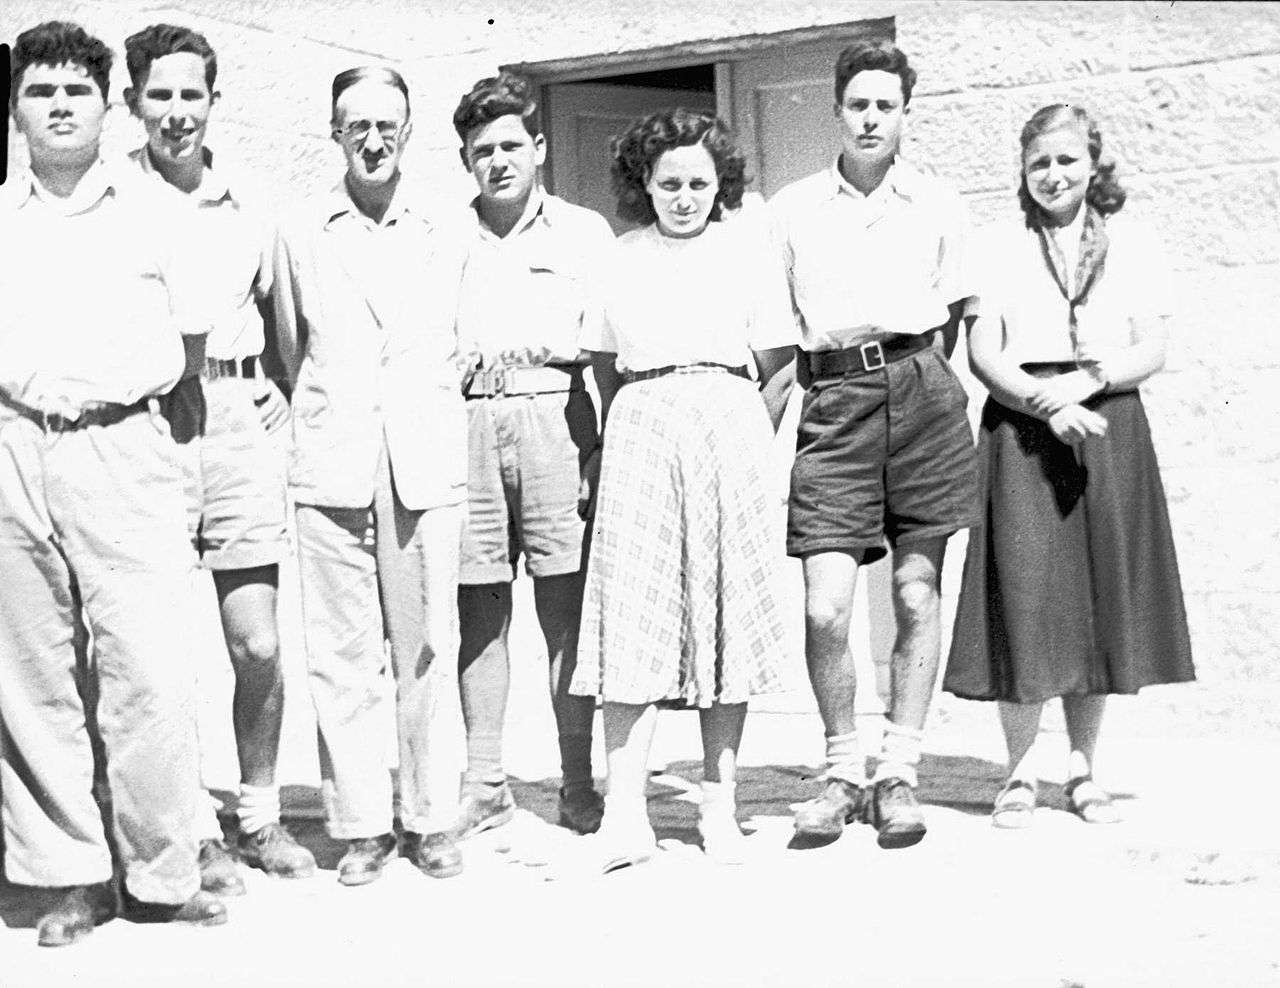  Leibowitz (third from left) with students at Tichon Beit Hakerem, 1947.